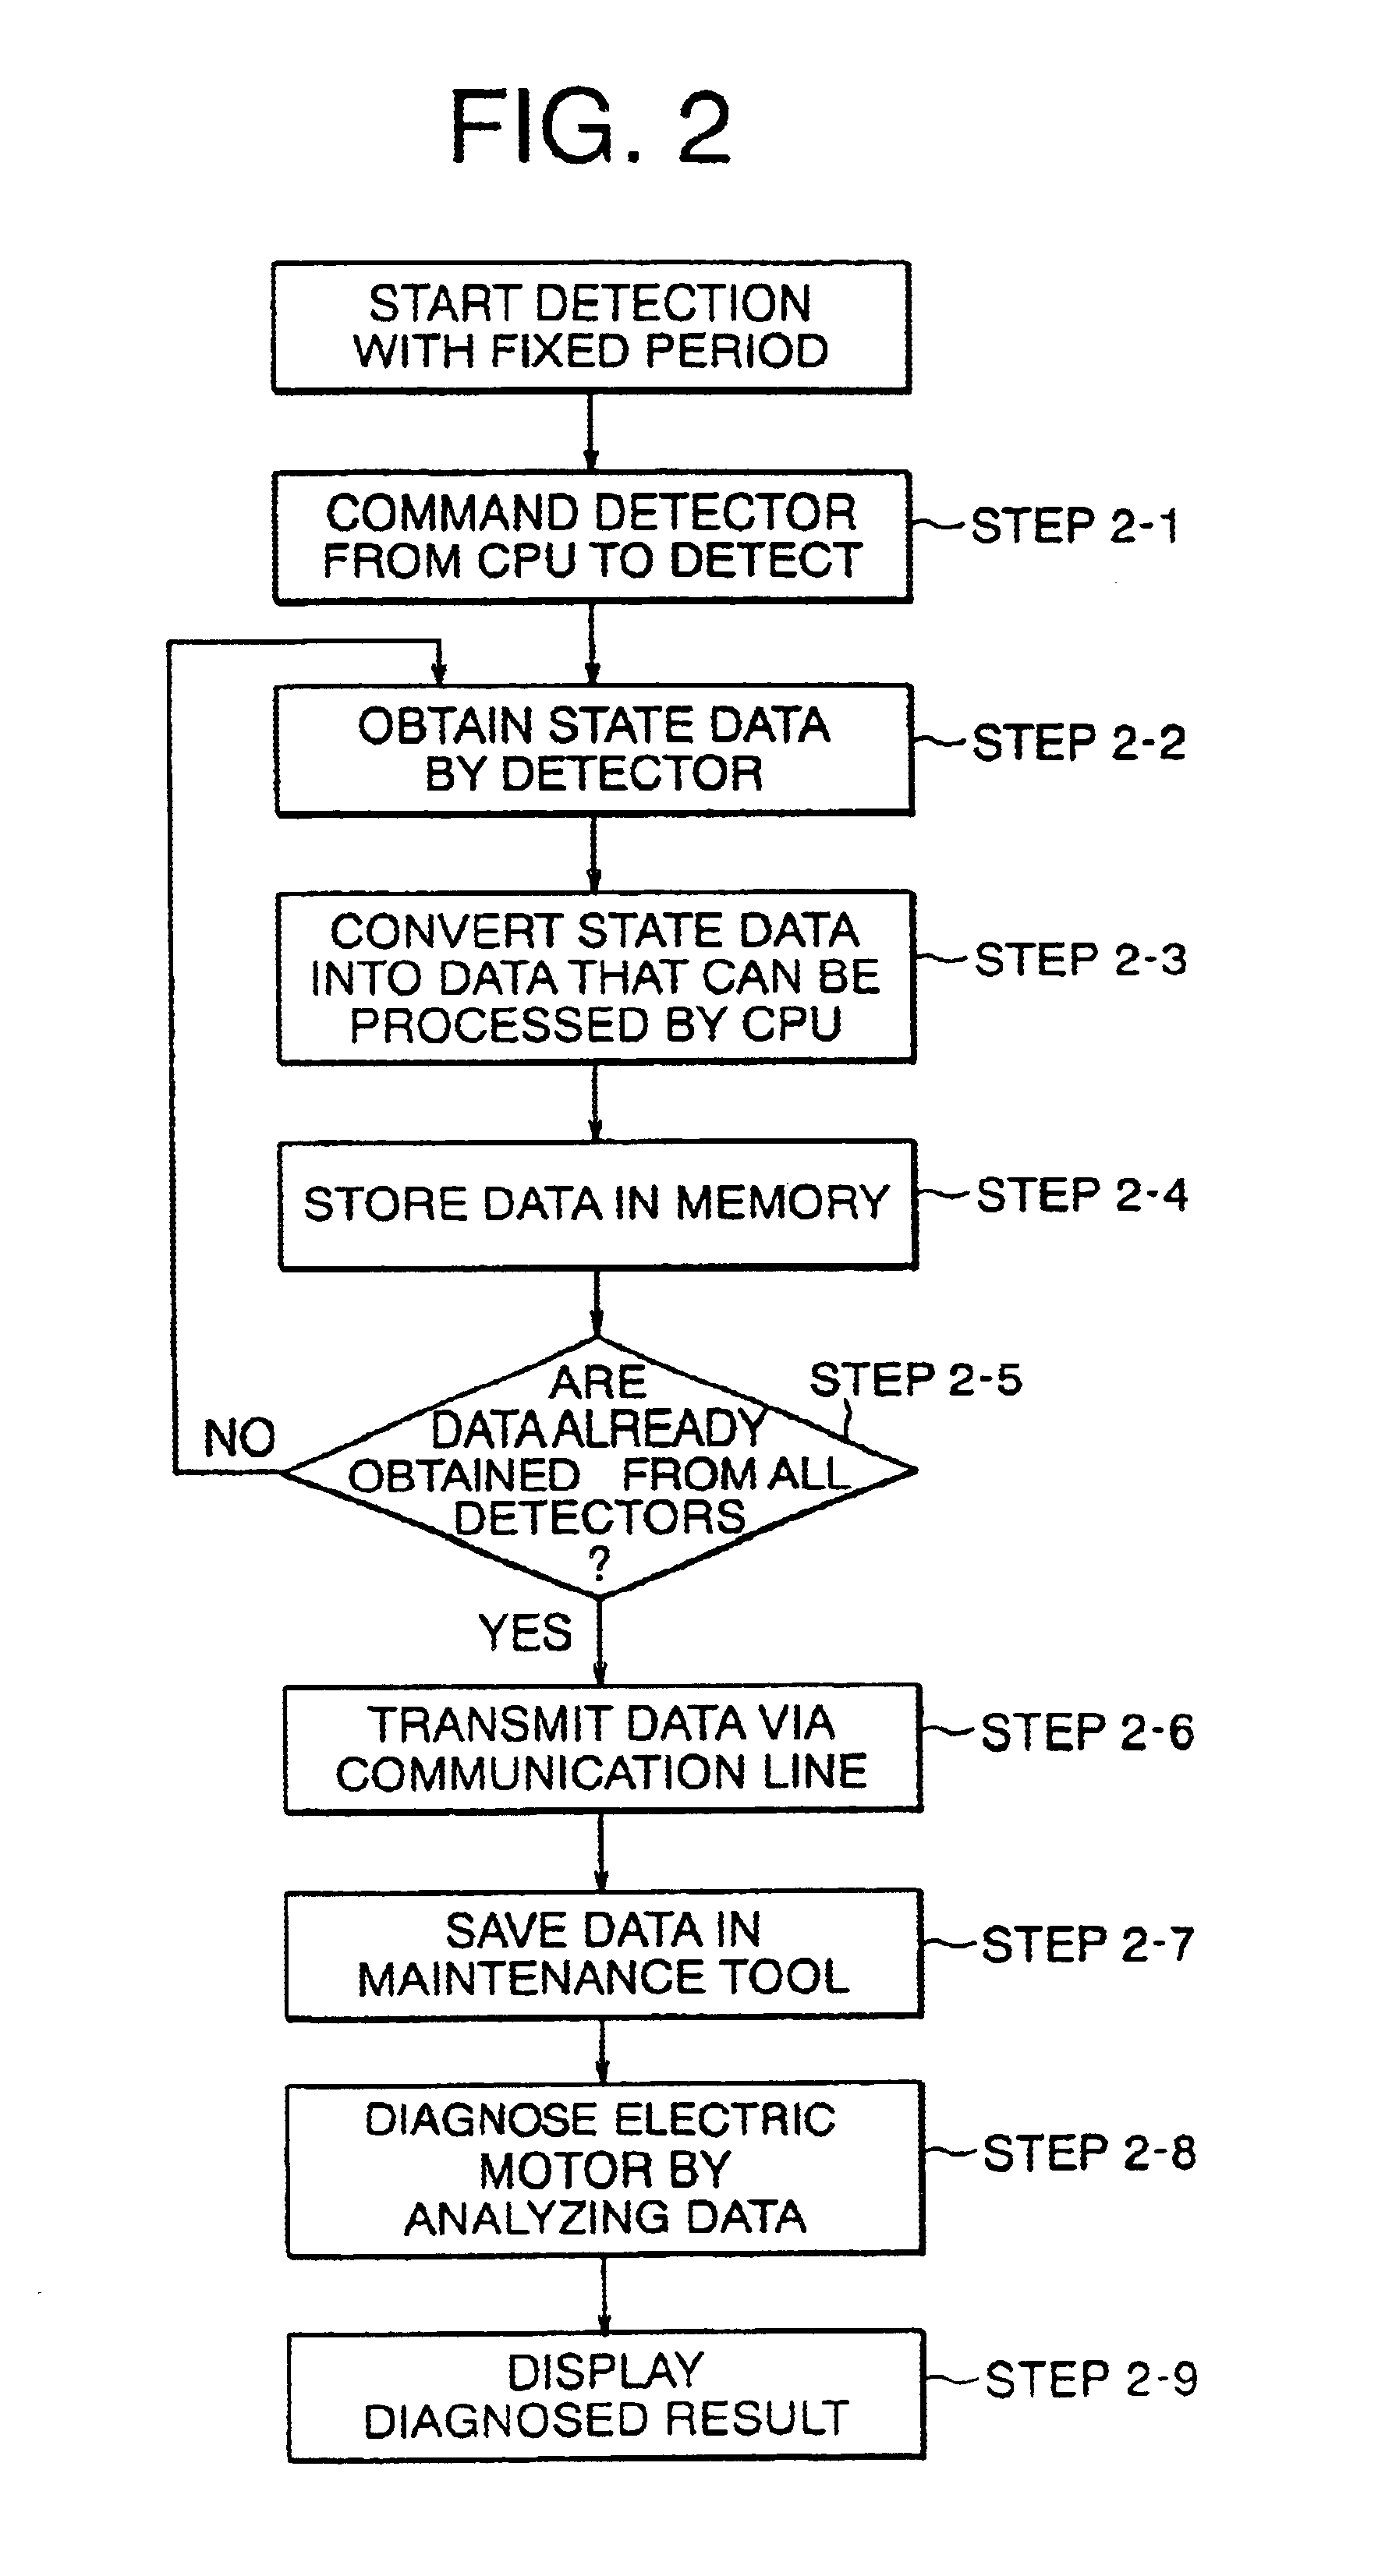 State-of-device remote monitoring system